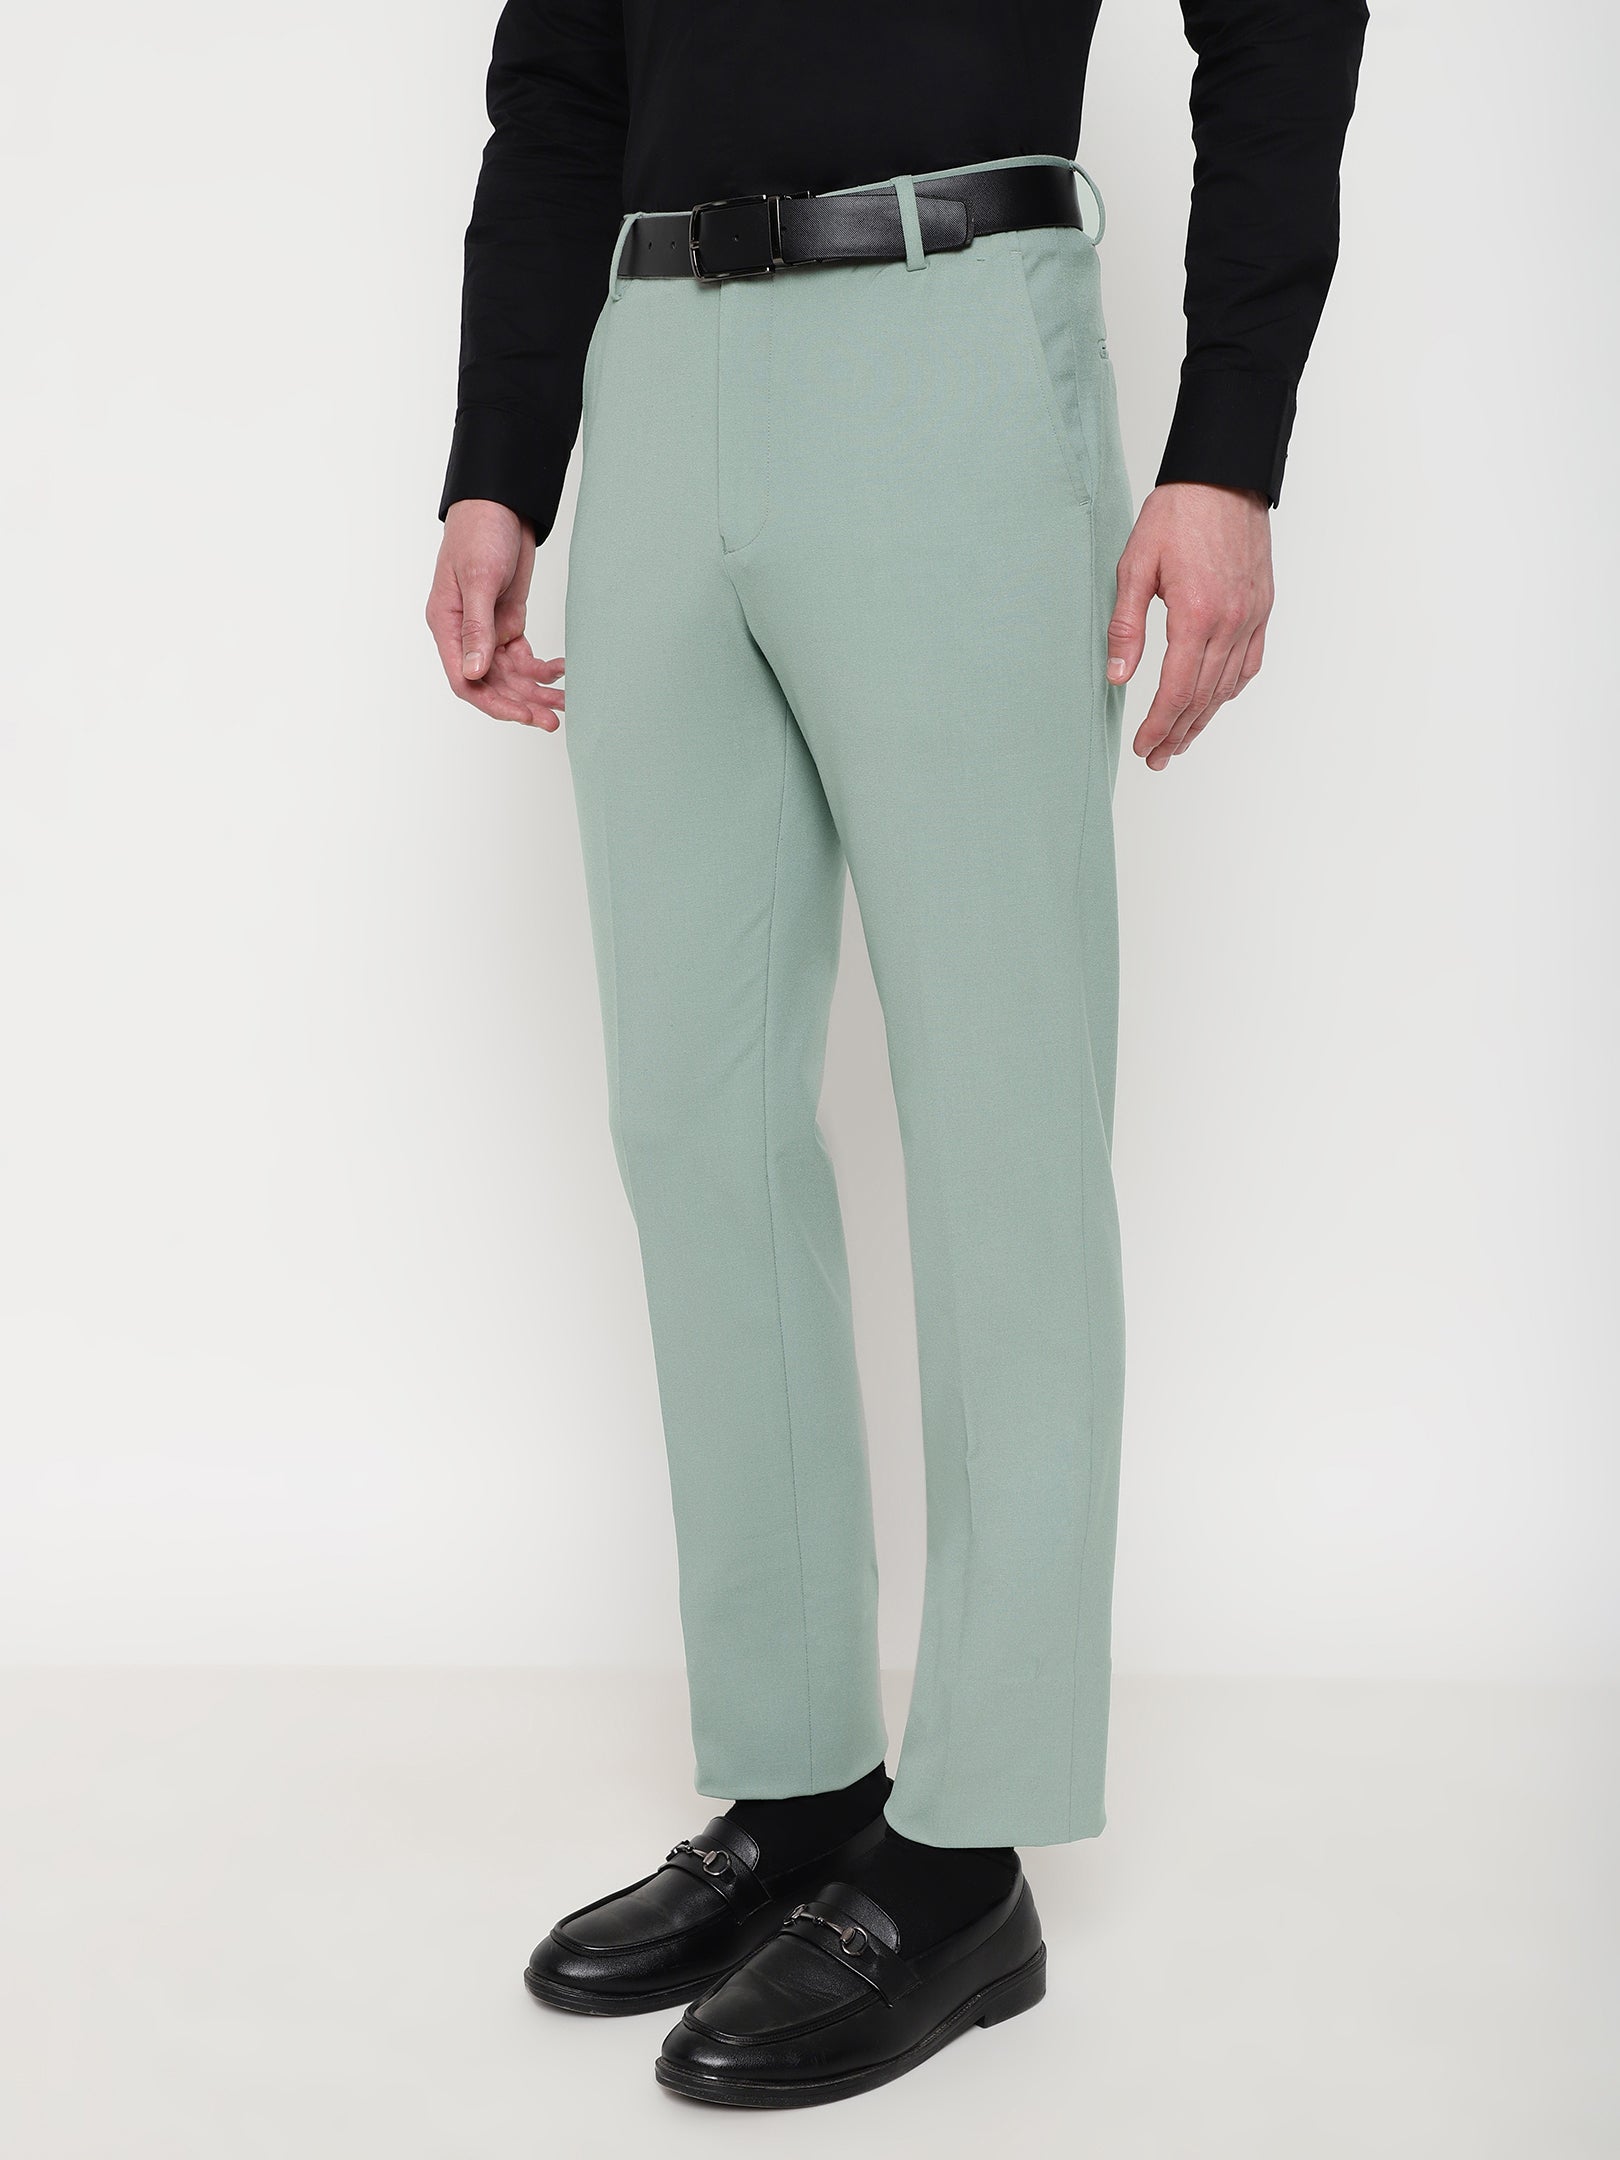 Buy Keith & Paul Men`s Casual Slim Fit Ankle Length Green Trouser Pant at  Amazon.in